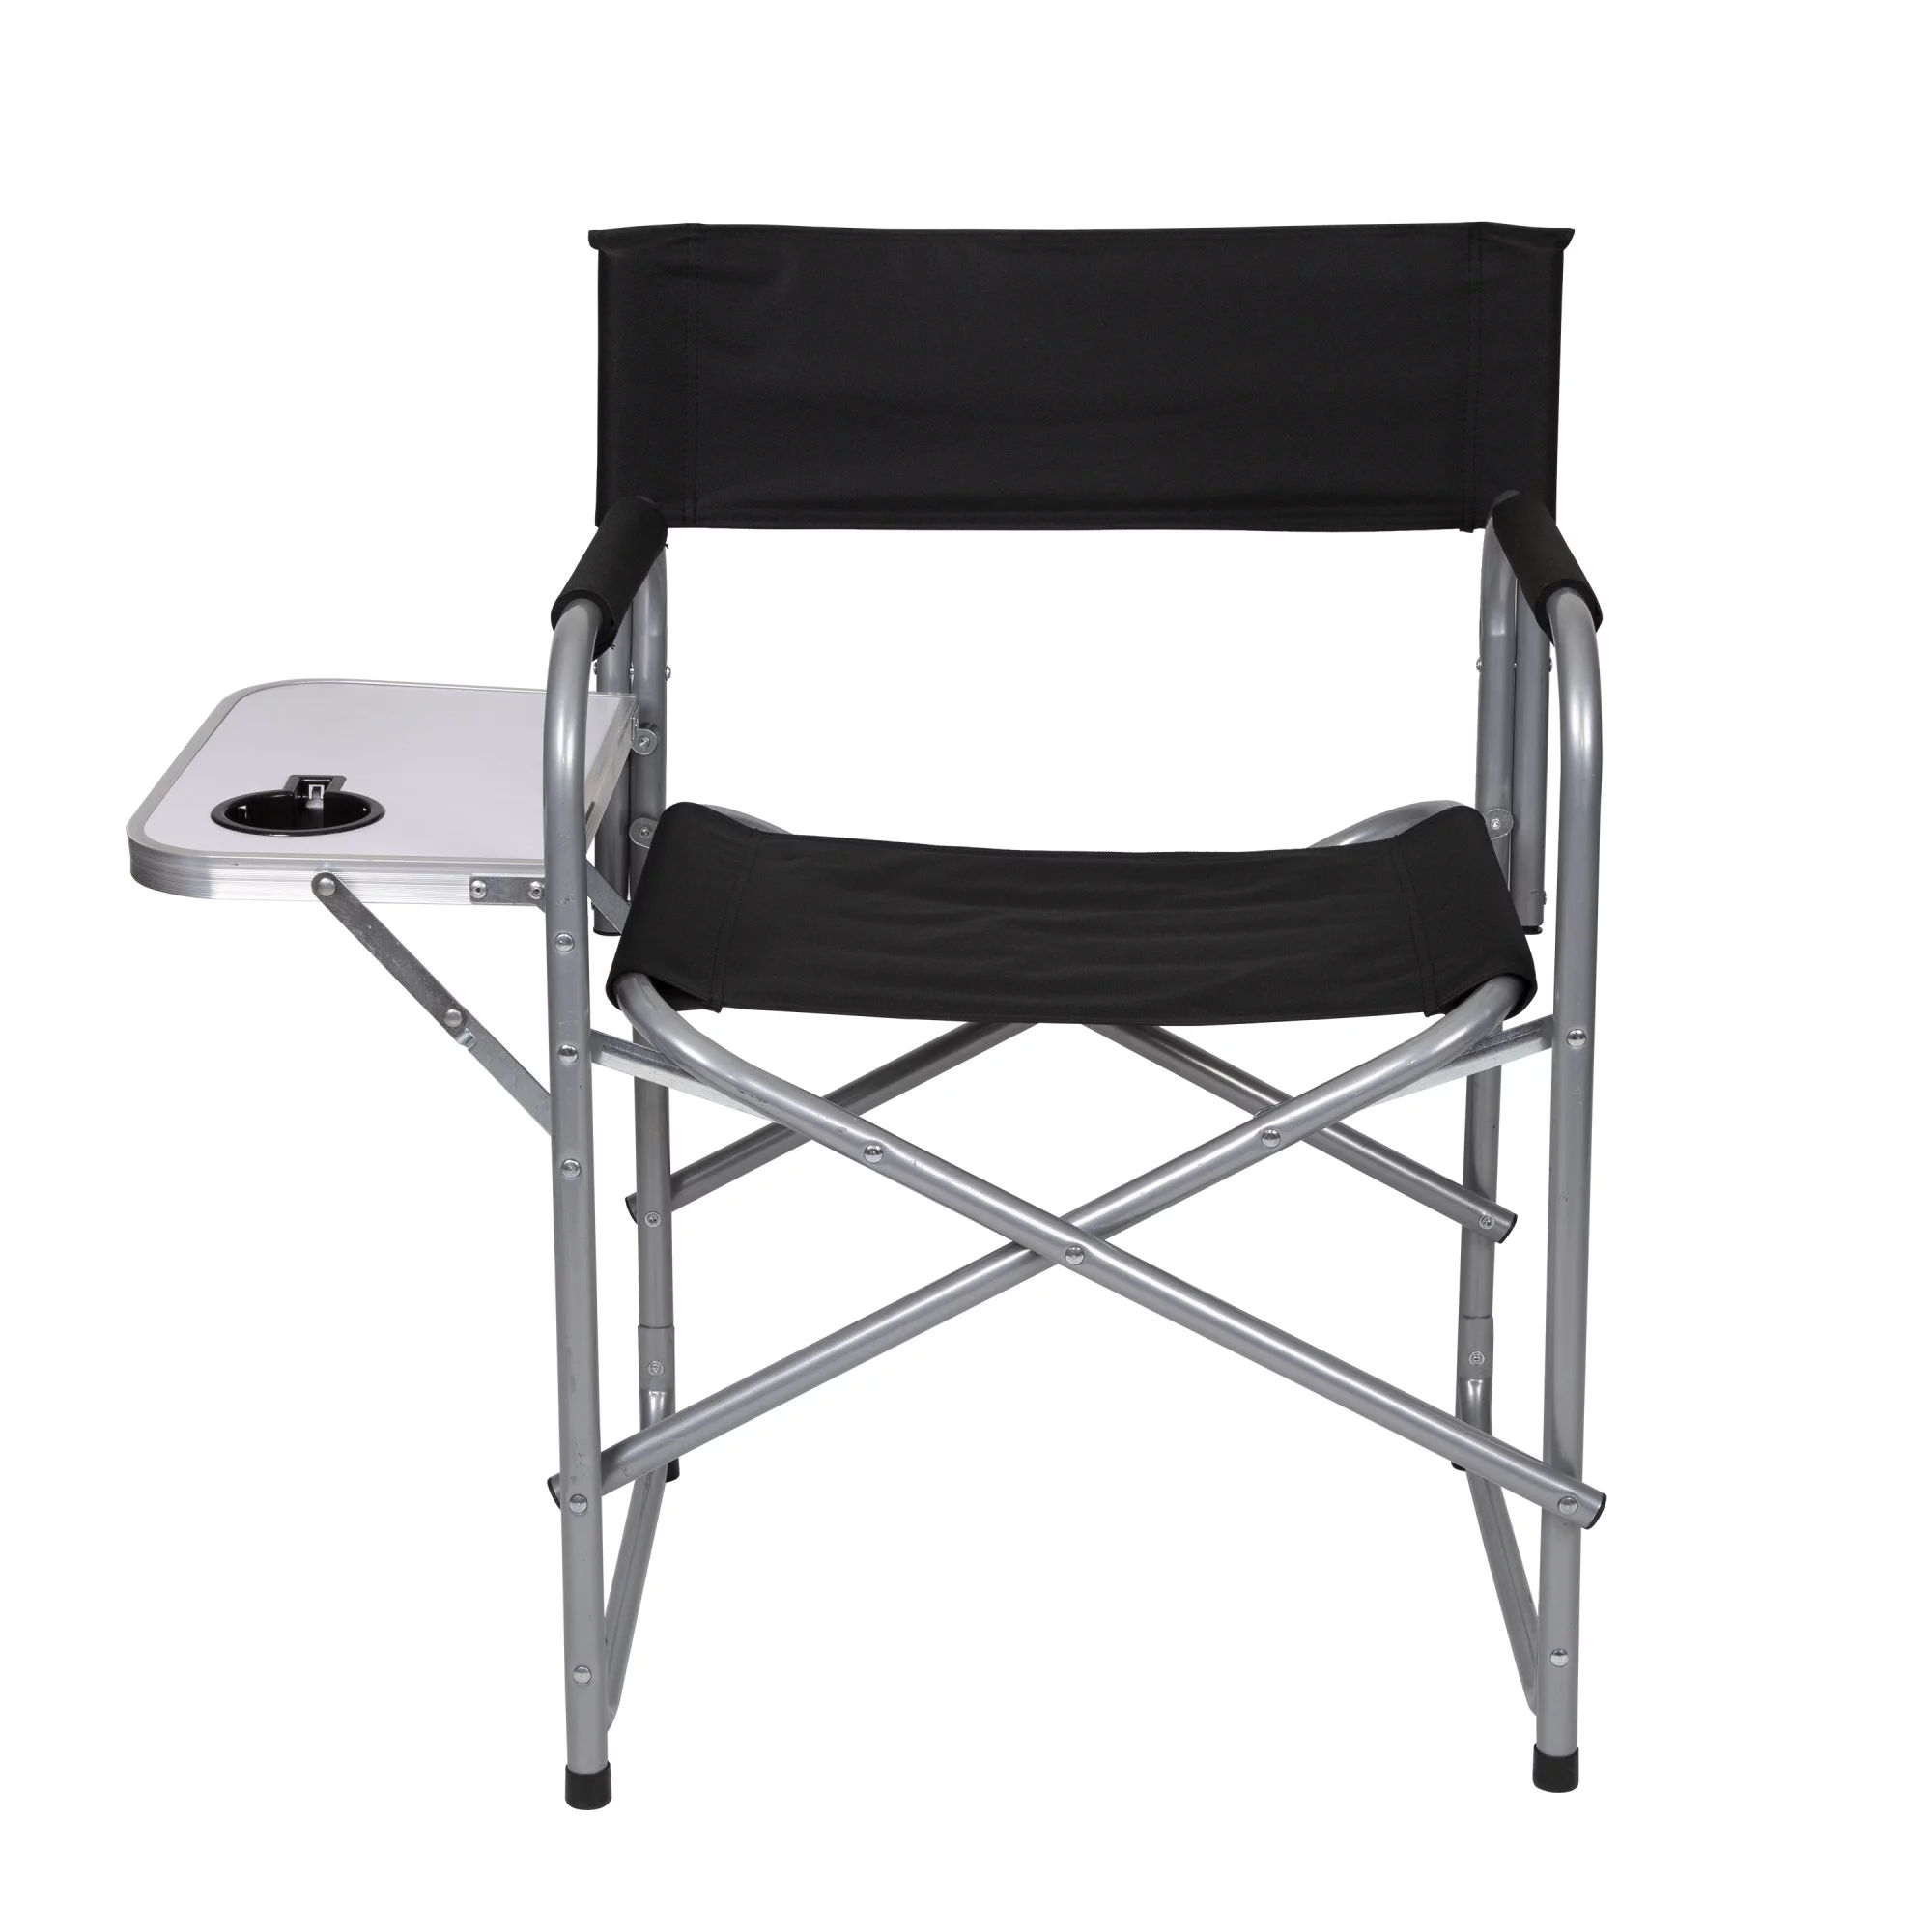 Stansport Camping Chair, Black